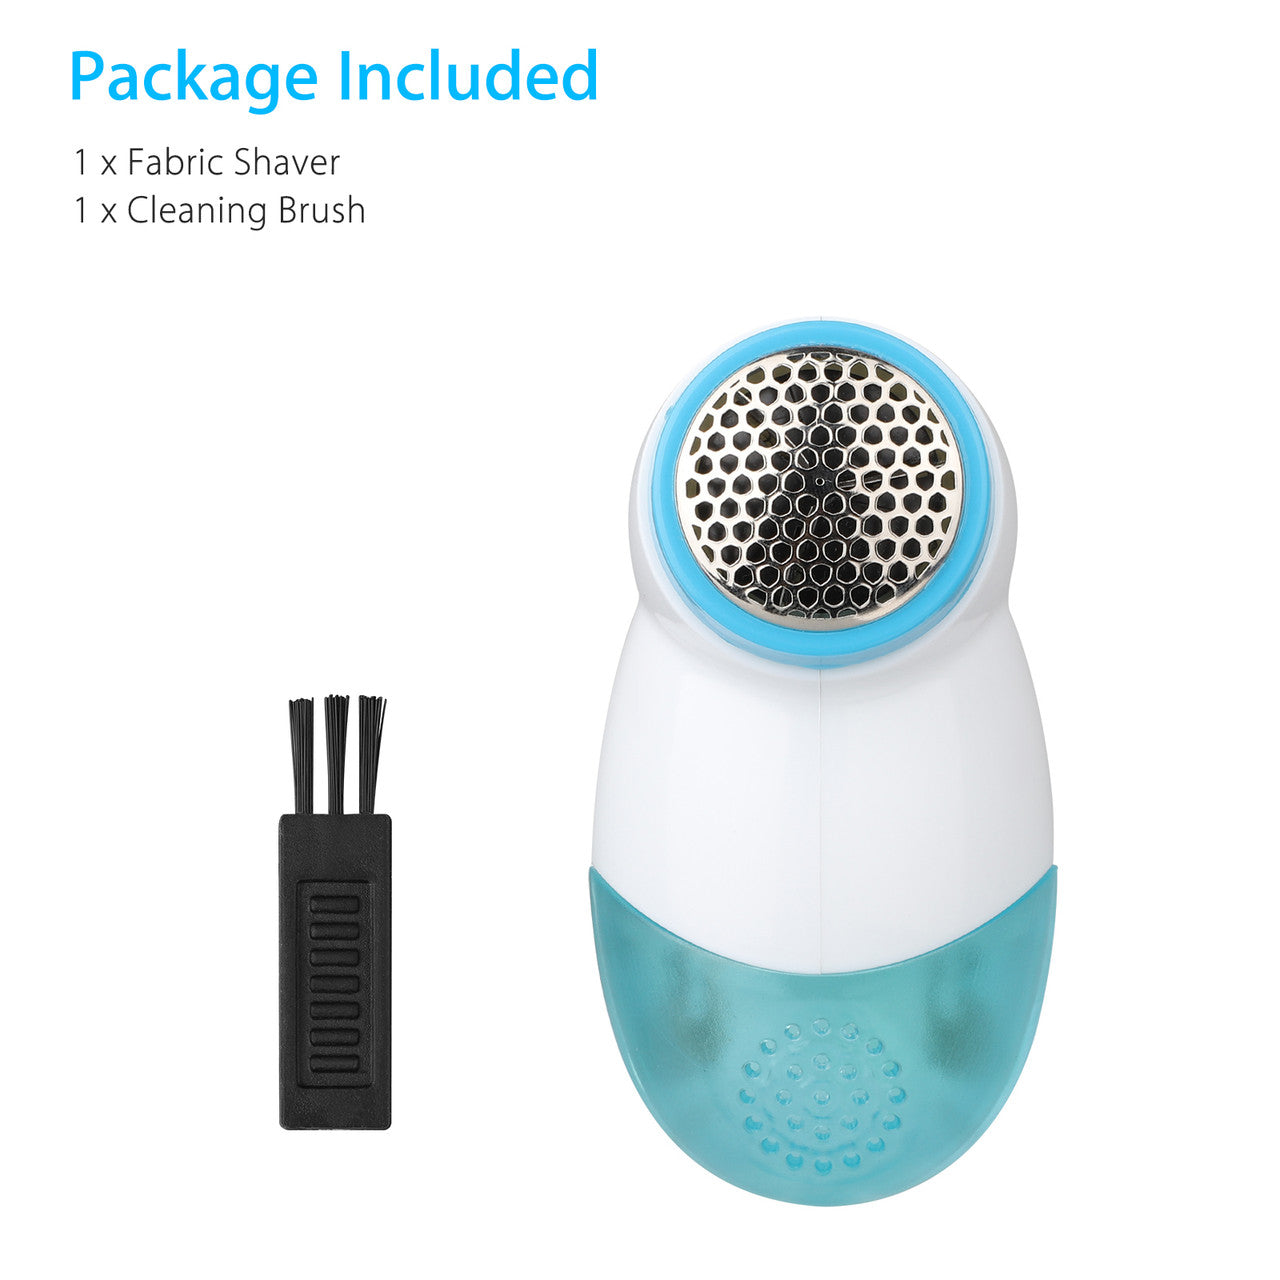 Portable Fabric Shaver, Lint Remover with Triple Stainless Steel Blades & Detachable larger lint collection with Cleaning Brush,Quickly and Effectively for Your Clothes Curtain